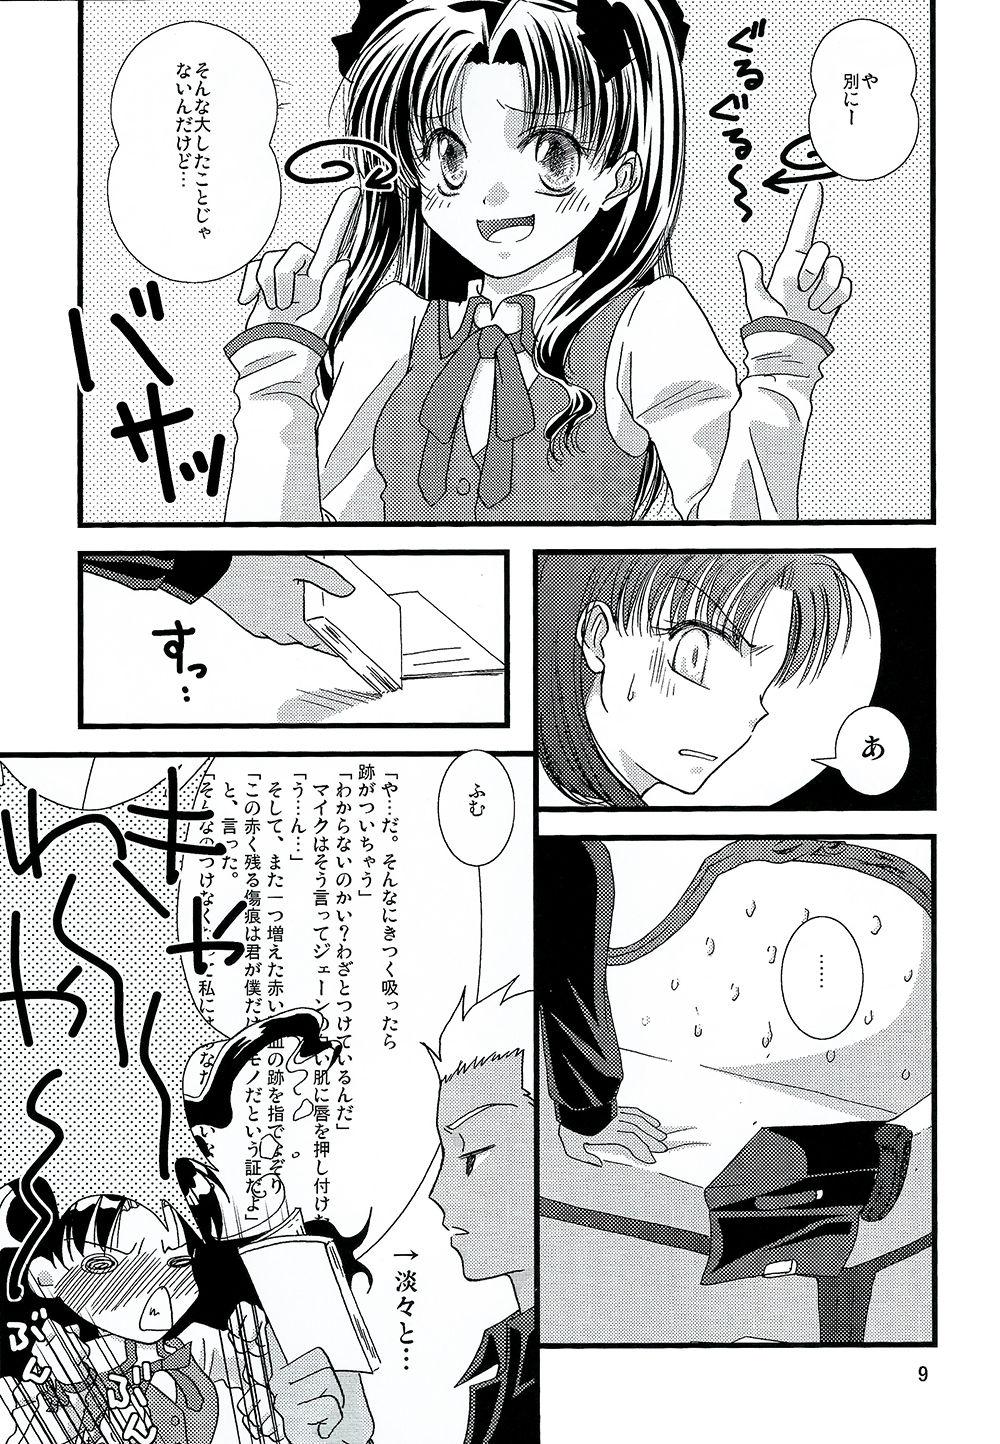 Shecock Kyuurinbon. The thing which remains - Fate stay night Mommy - Page 6